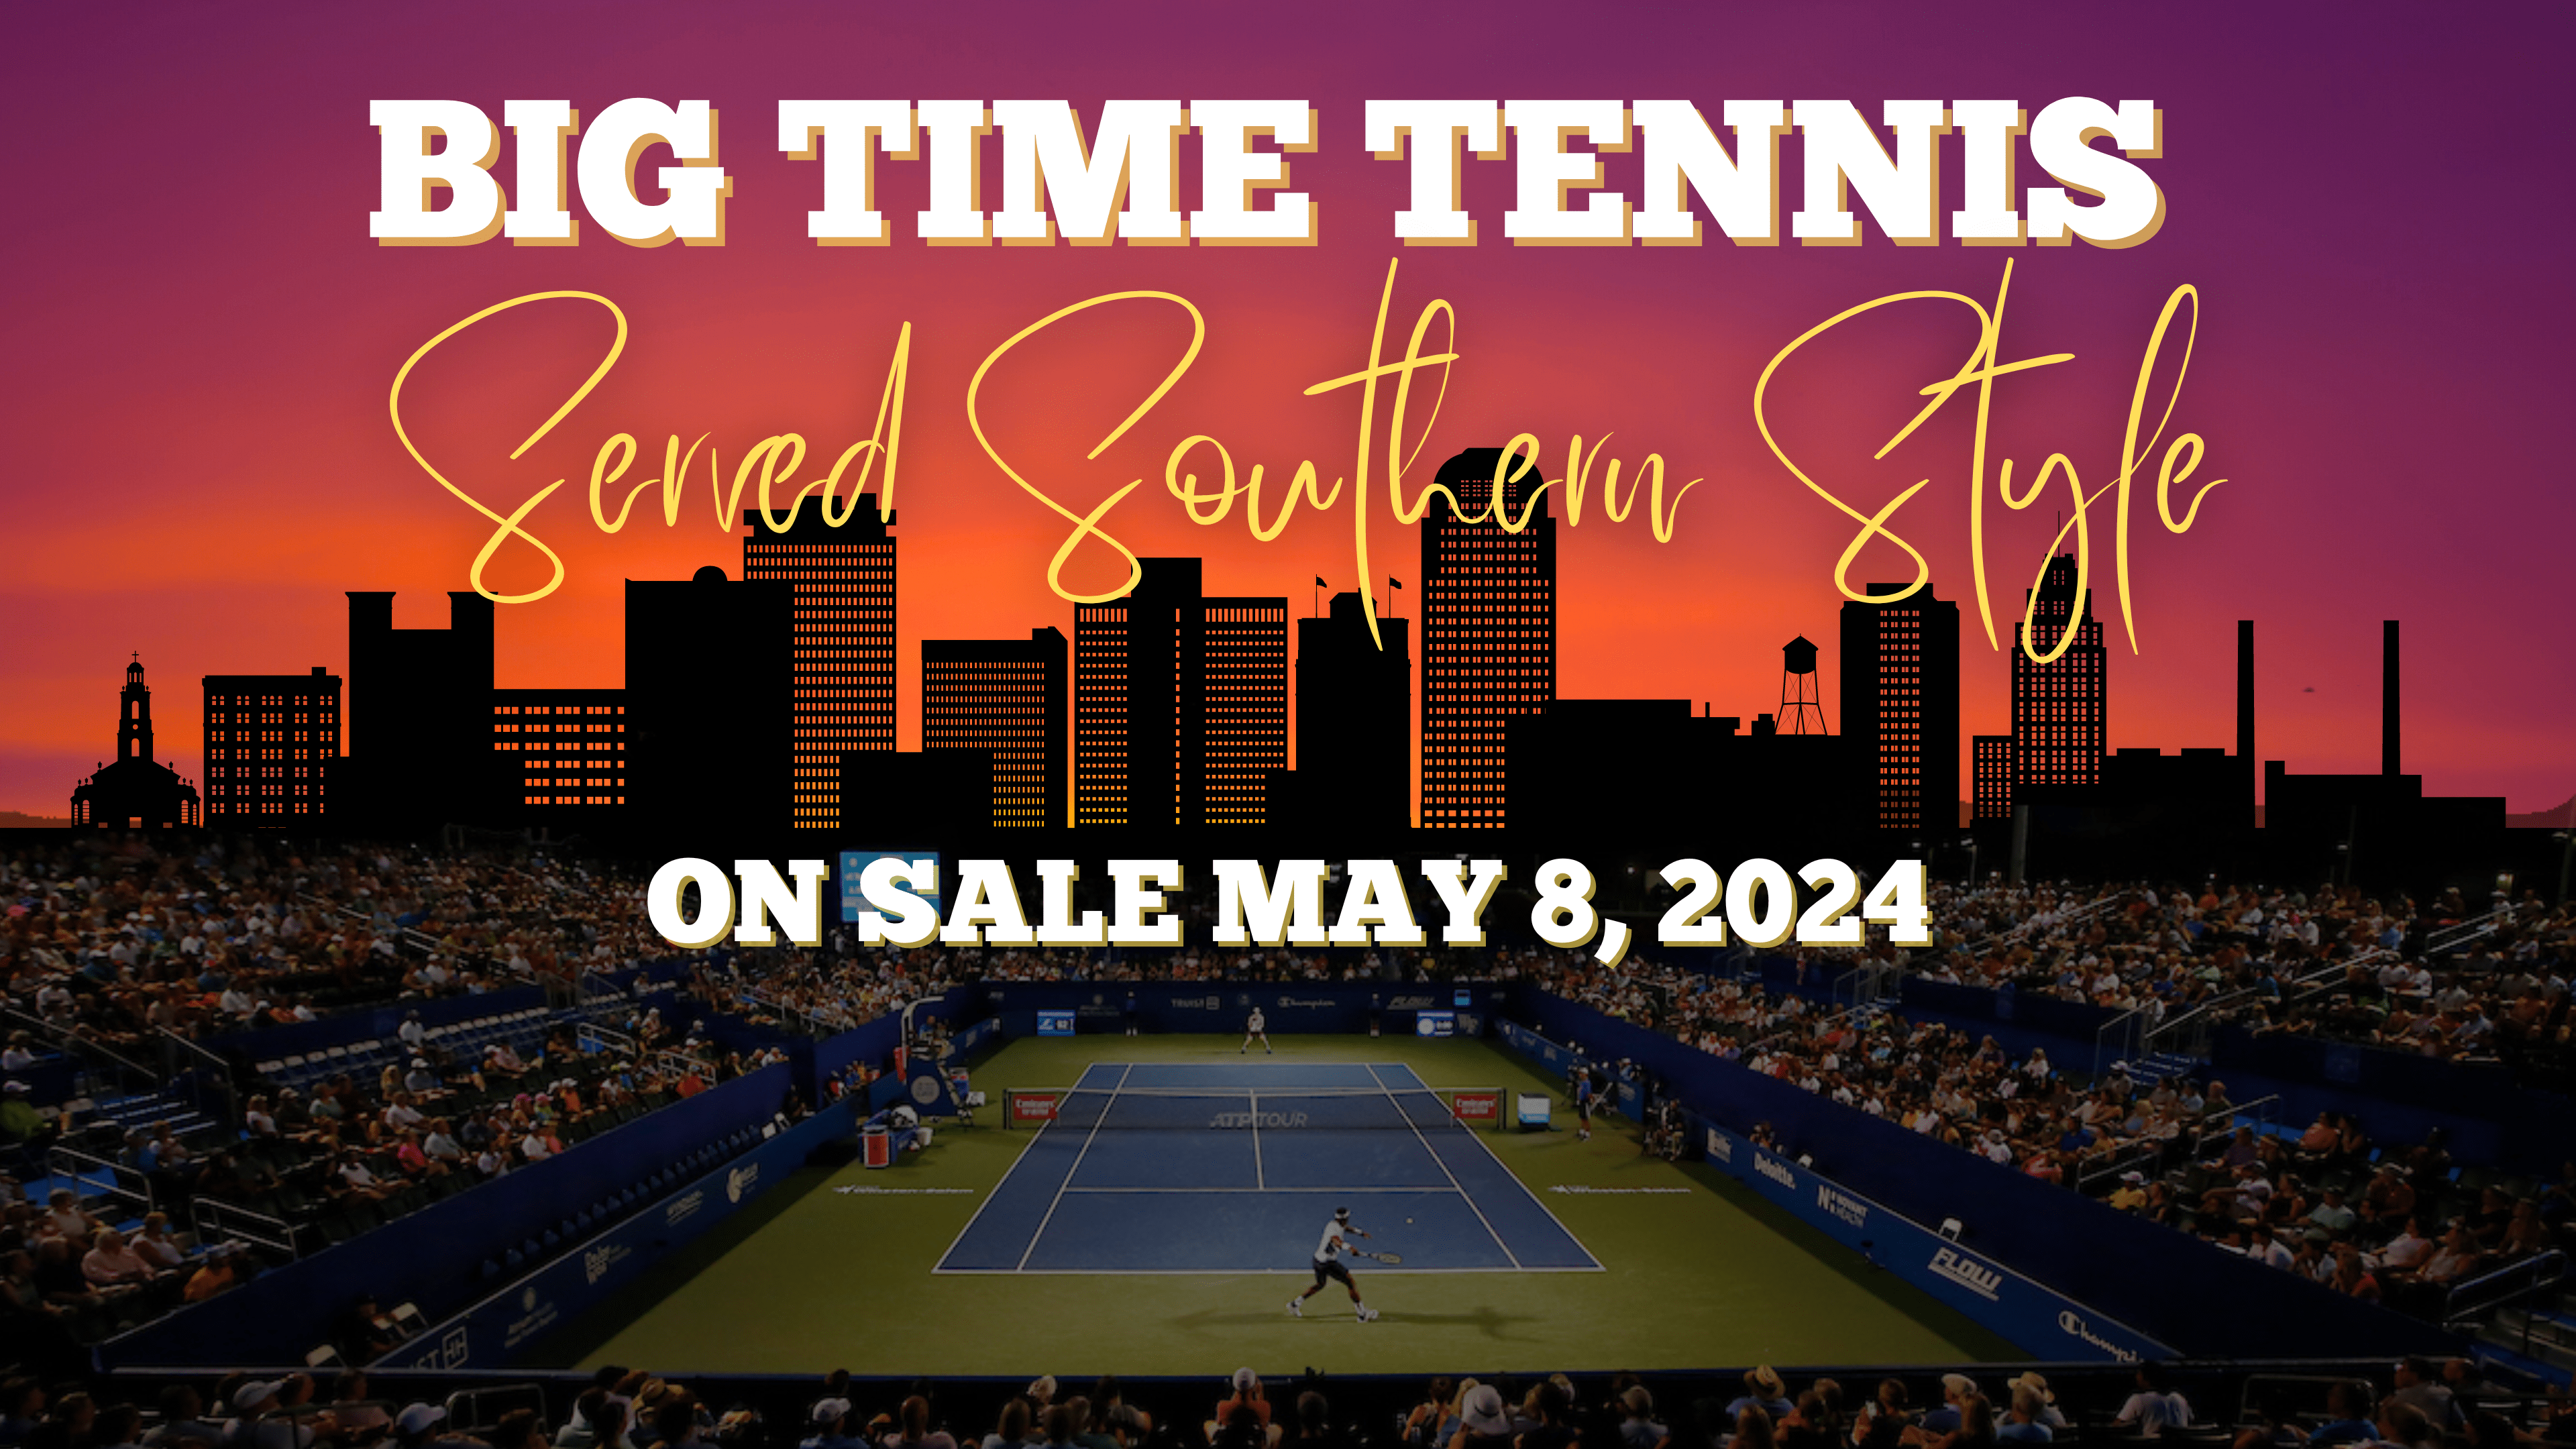 Big Time Tennis Served Southern Style | Tickets on Sale May 8